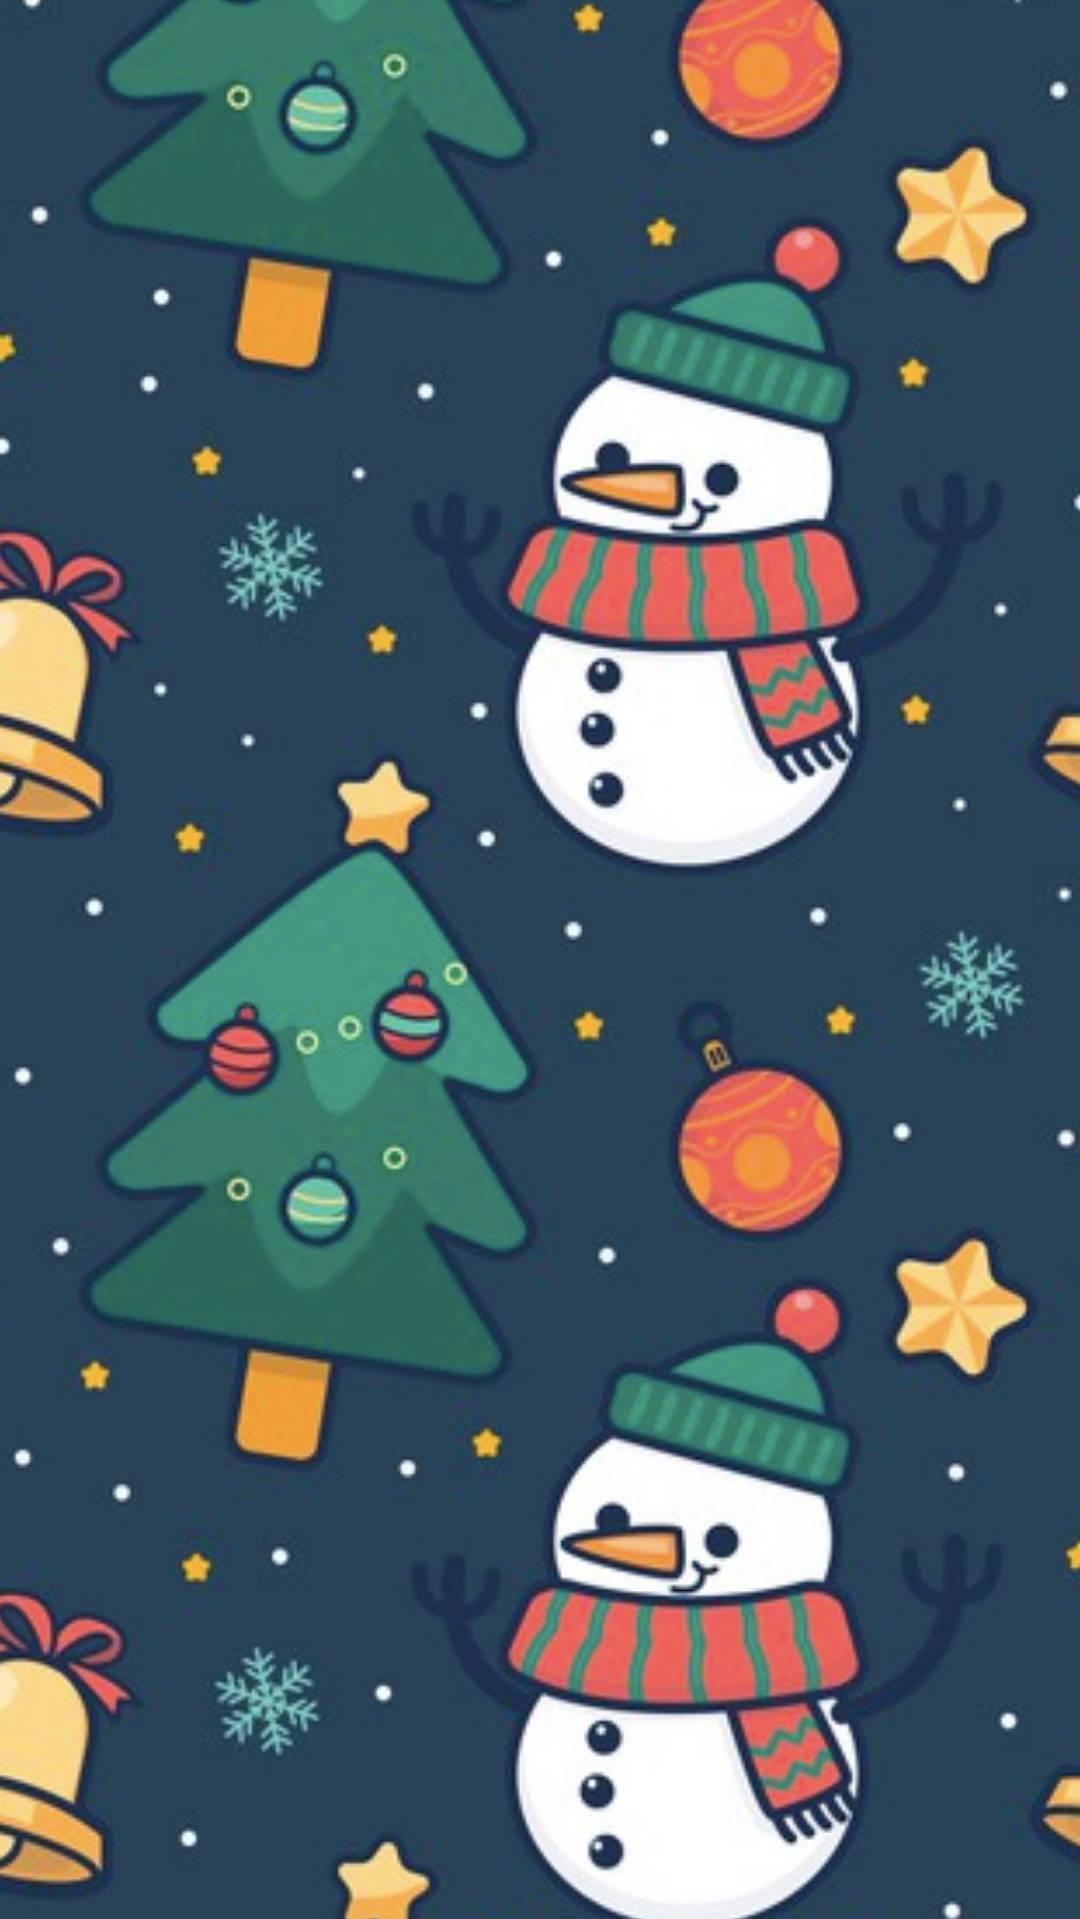 Cute Christmas Iphone Backgrounds